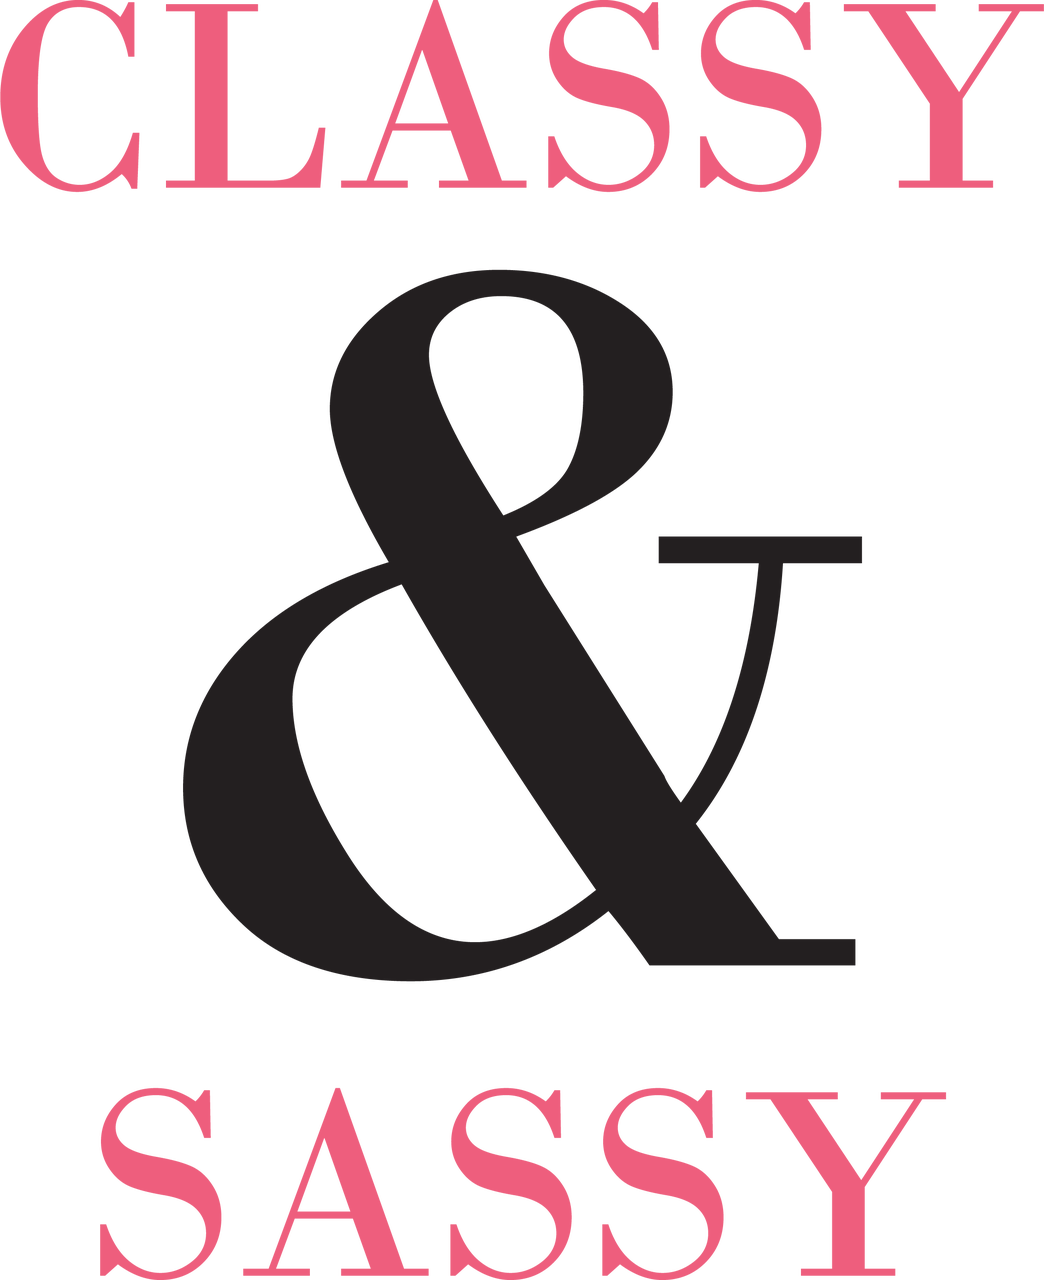 Download Classy & Sassy SVG Cut File - Snap Click Supply Co.